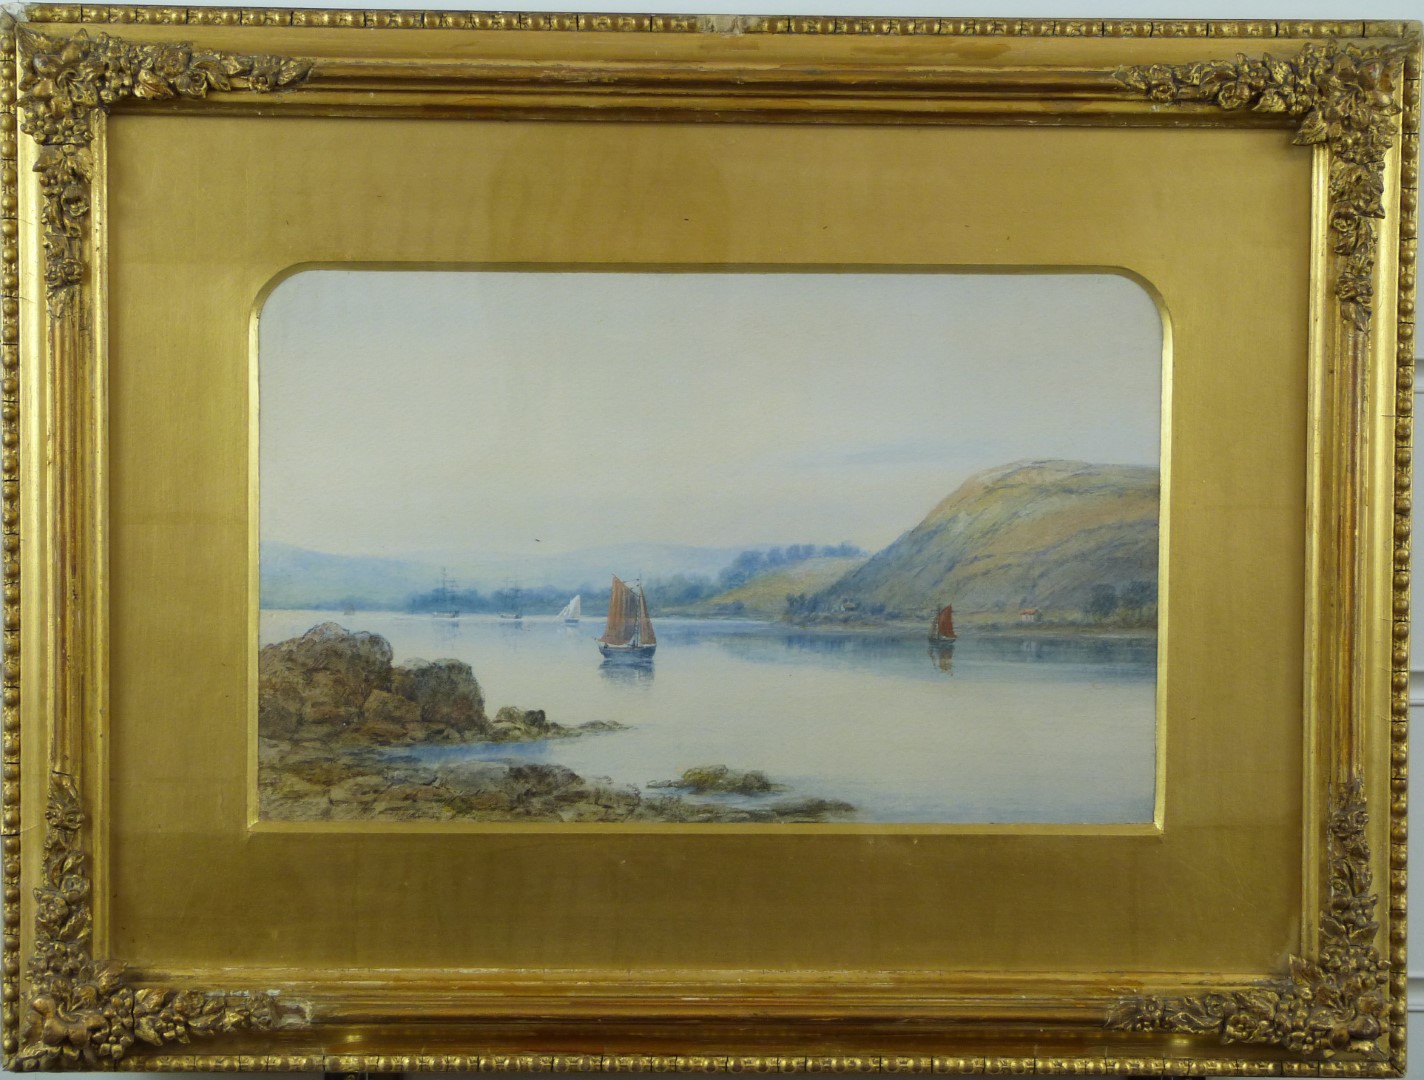 19thC watercolour coastal scene with boats in an estuary, 17 x 27cm, in gilt frame - Image 2 of 3